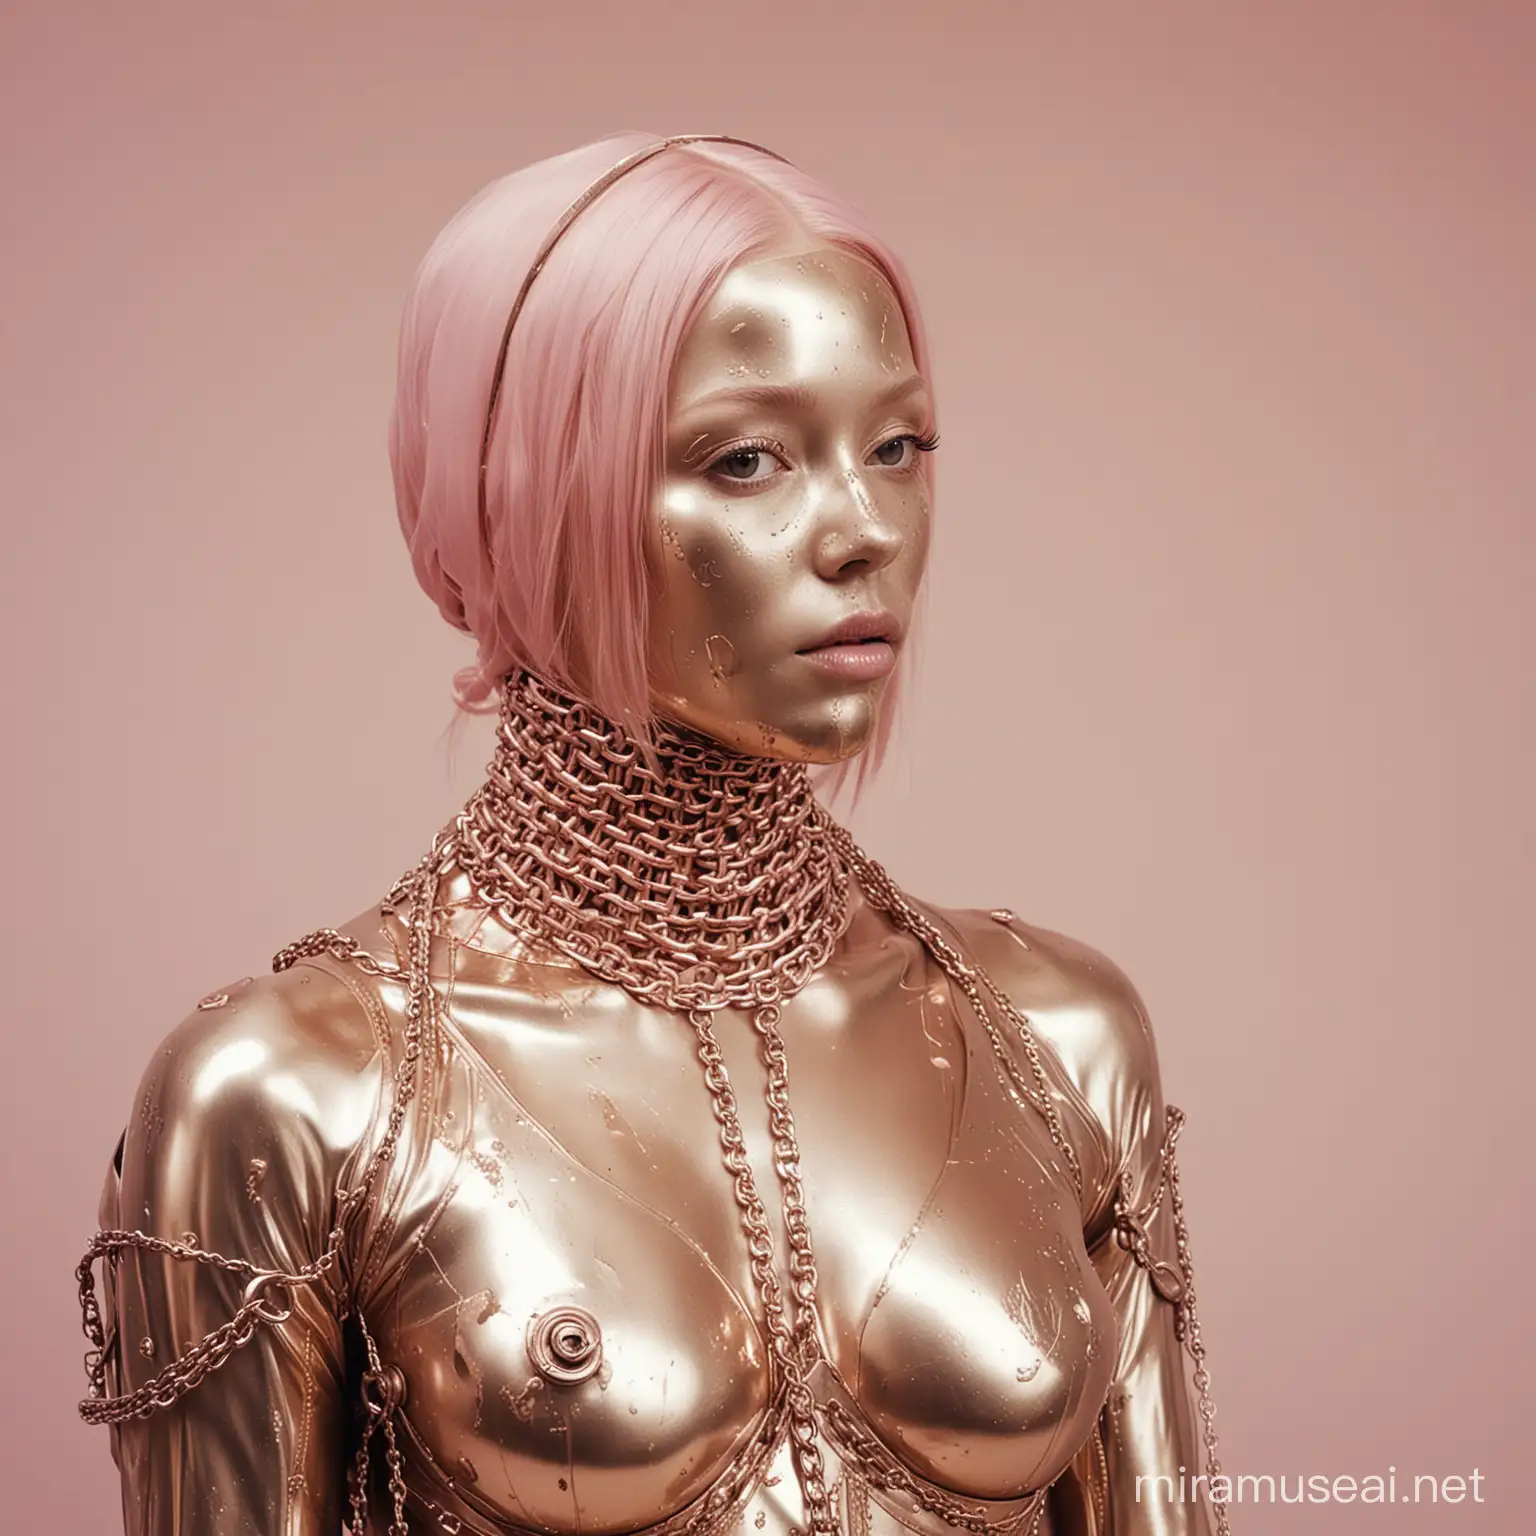 a person in a metal suit with a chain, in the style of gum bichromate, camilla d'errico, light bronze and pink, disfigured forms, webcam photography, religious subjects, donna huanca --s 1000 --c 100 --w 1000 --v 5. 2 --style raw --ar 70:87
